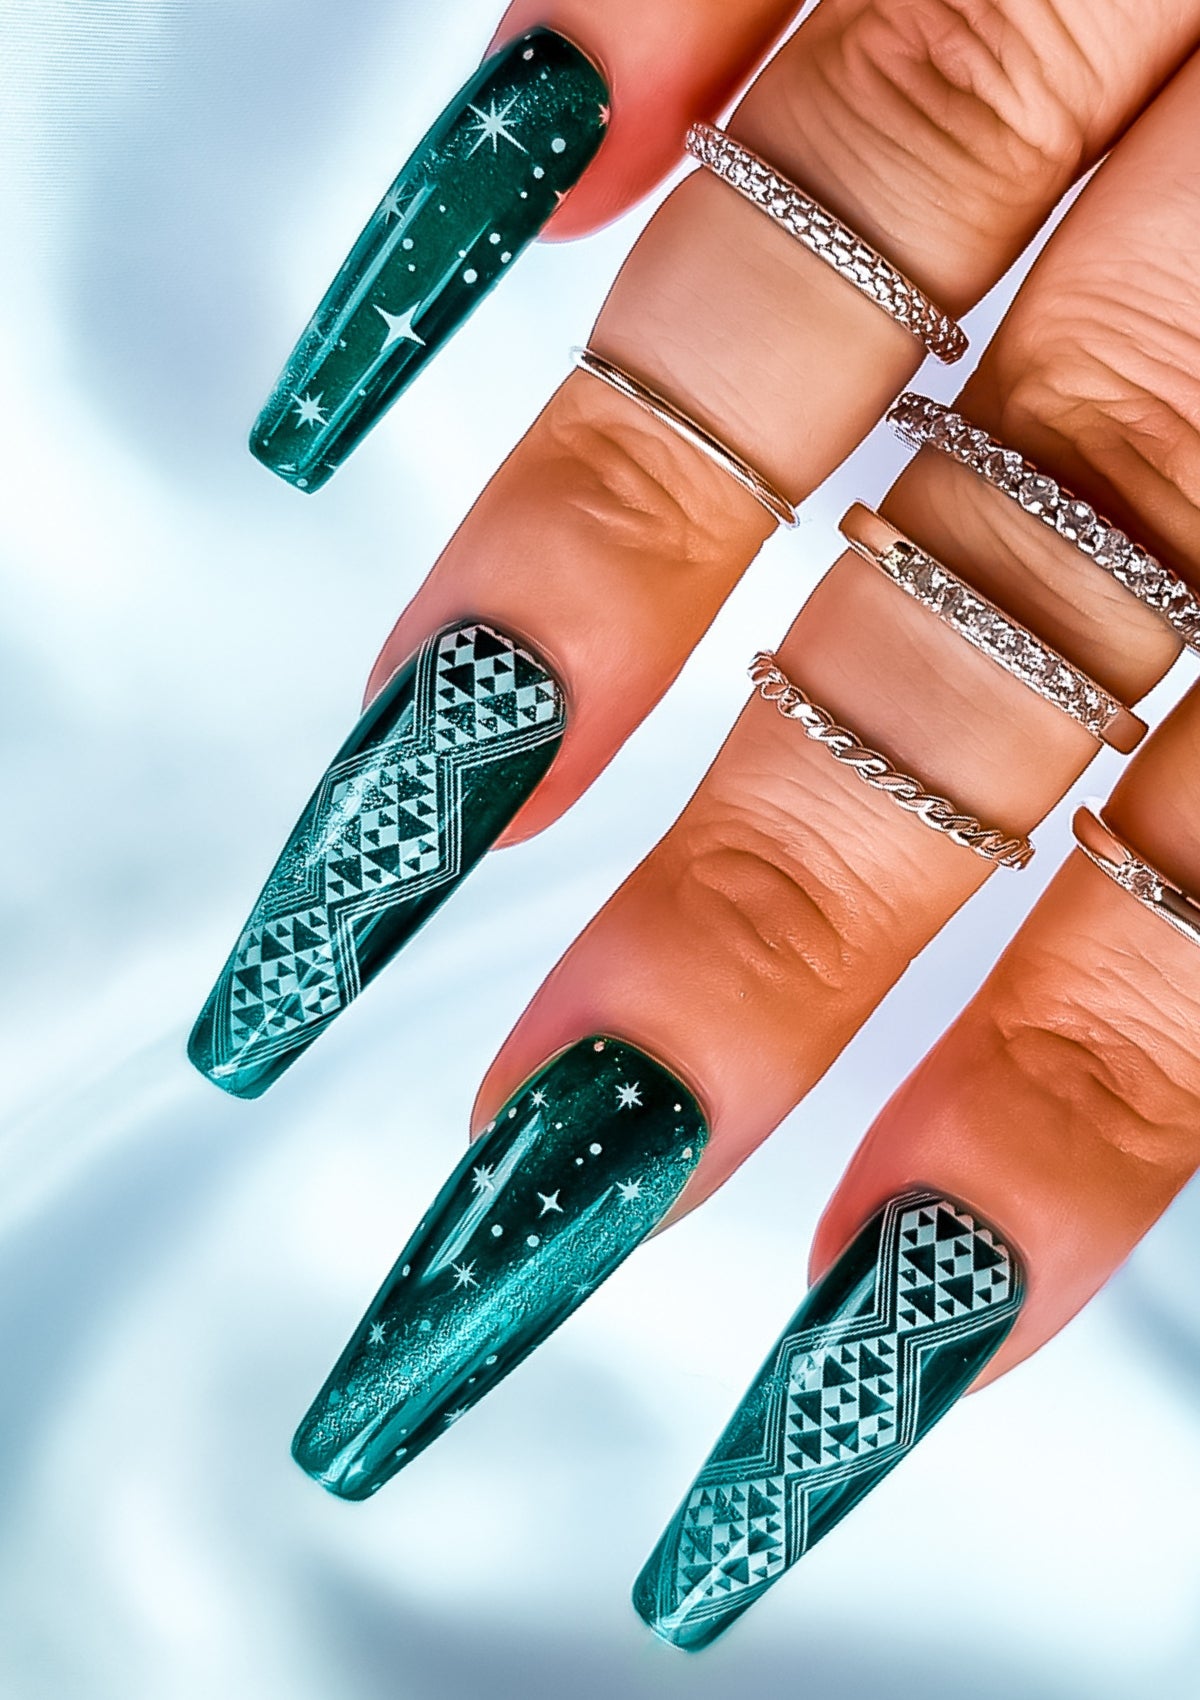 Long coffin shaped nails in emerald cat eye gel polish with white Maori nail art in Aonui design by Adrienne Whitewood on the index and ring fingers, and stars on the pinky and middle fingers.